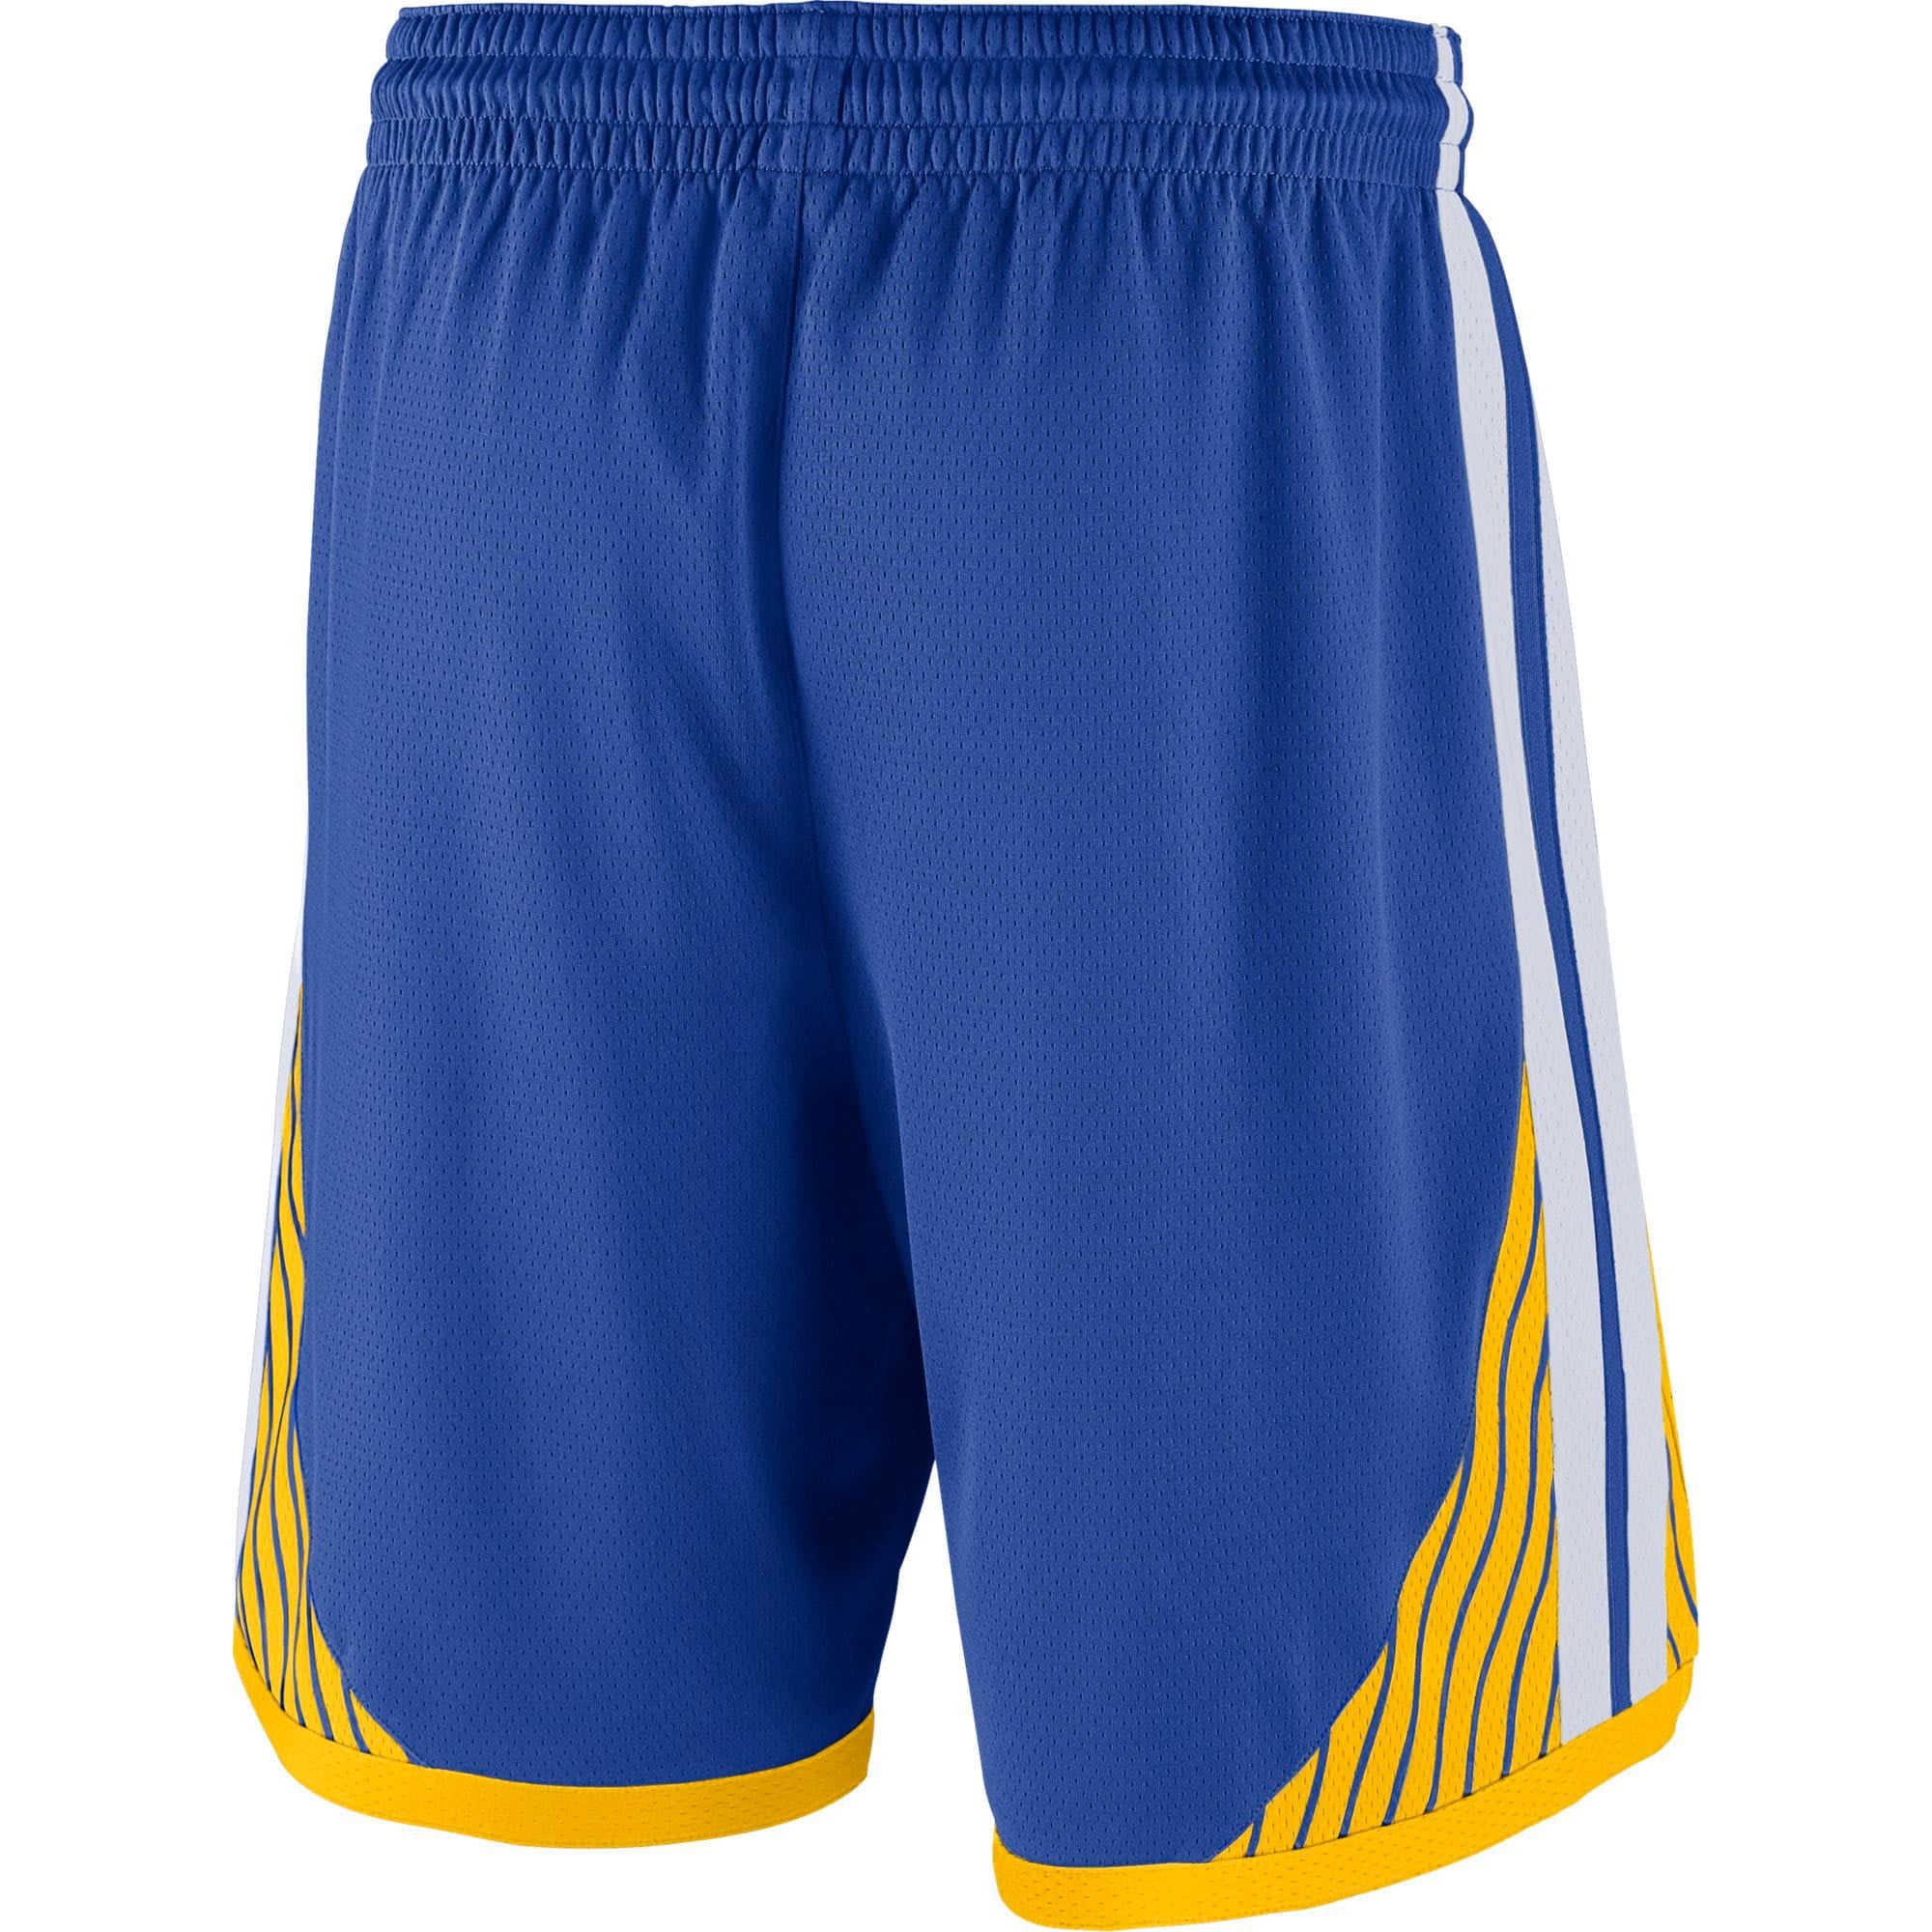 Golden State Warriors Basketball Shorts Men's Pants NWT Stitched 